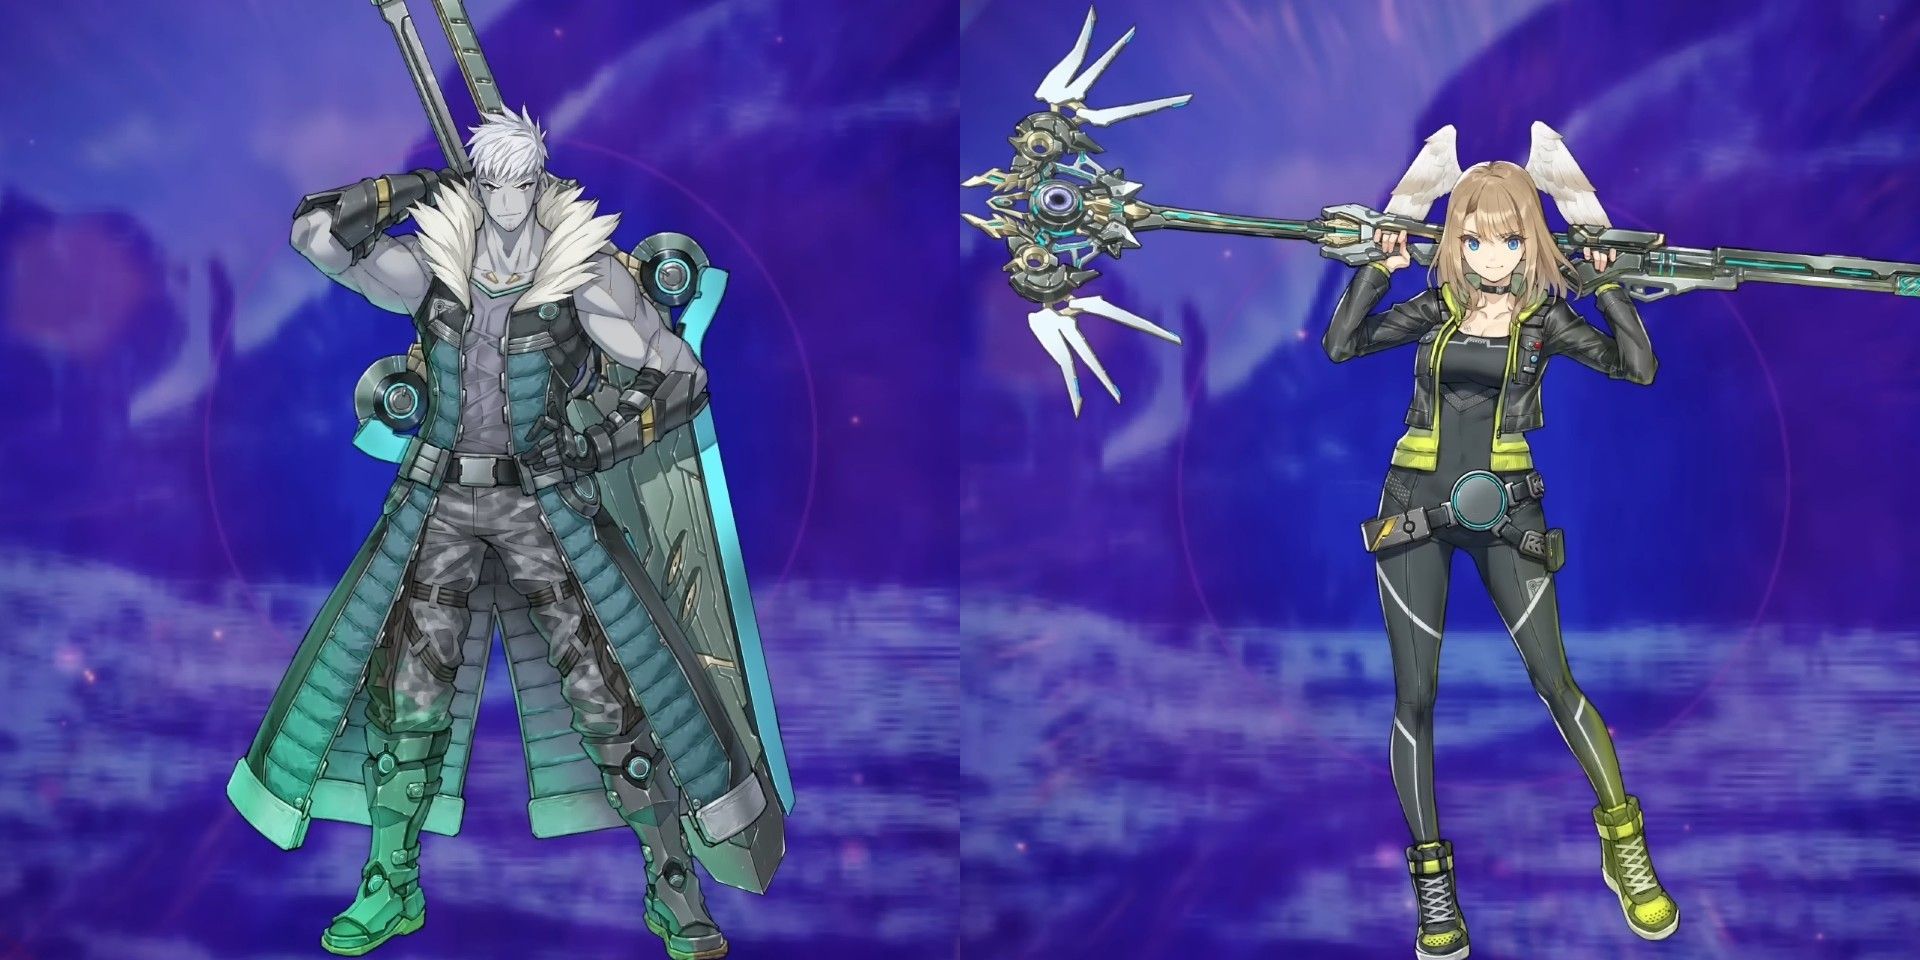 Xenoblade Chronicles 3 Heroes: All Heroes and how to unlock them